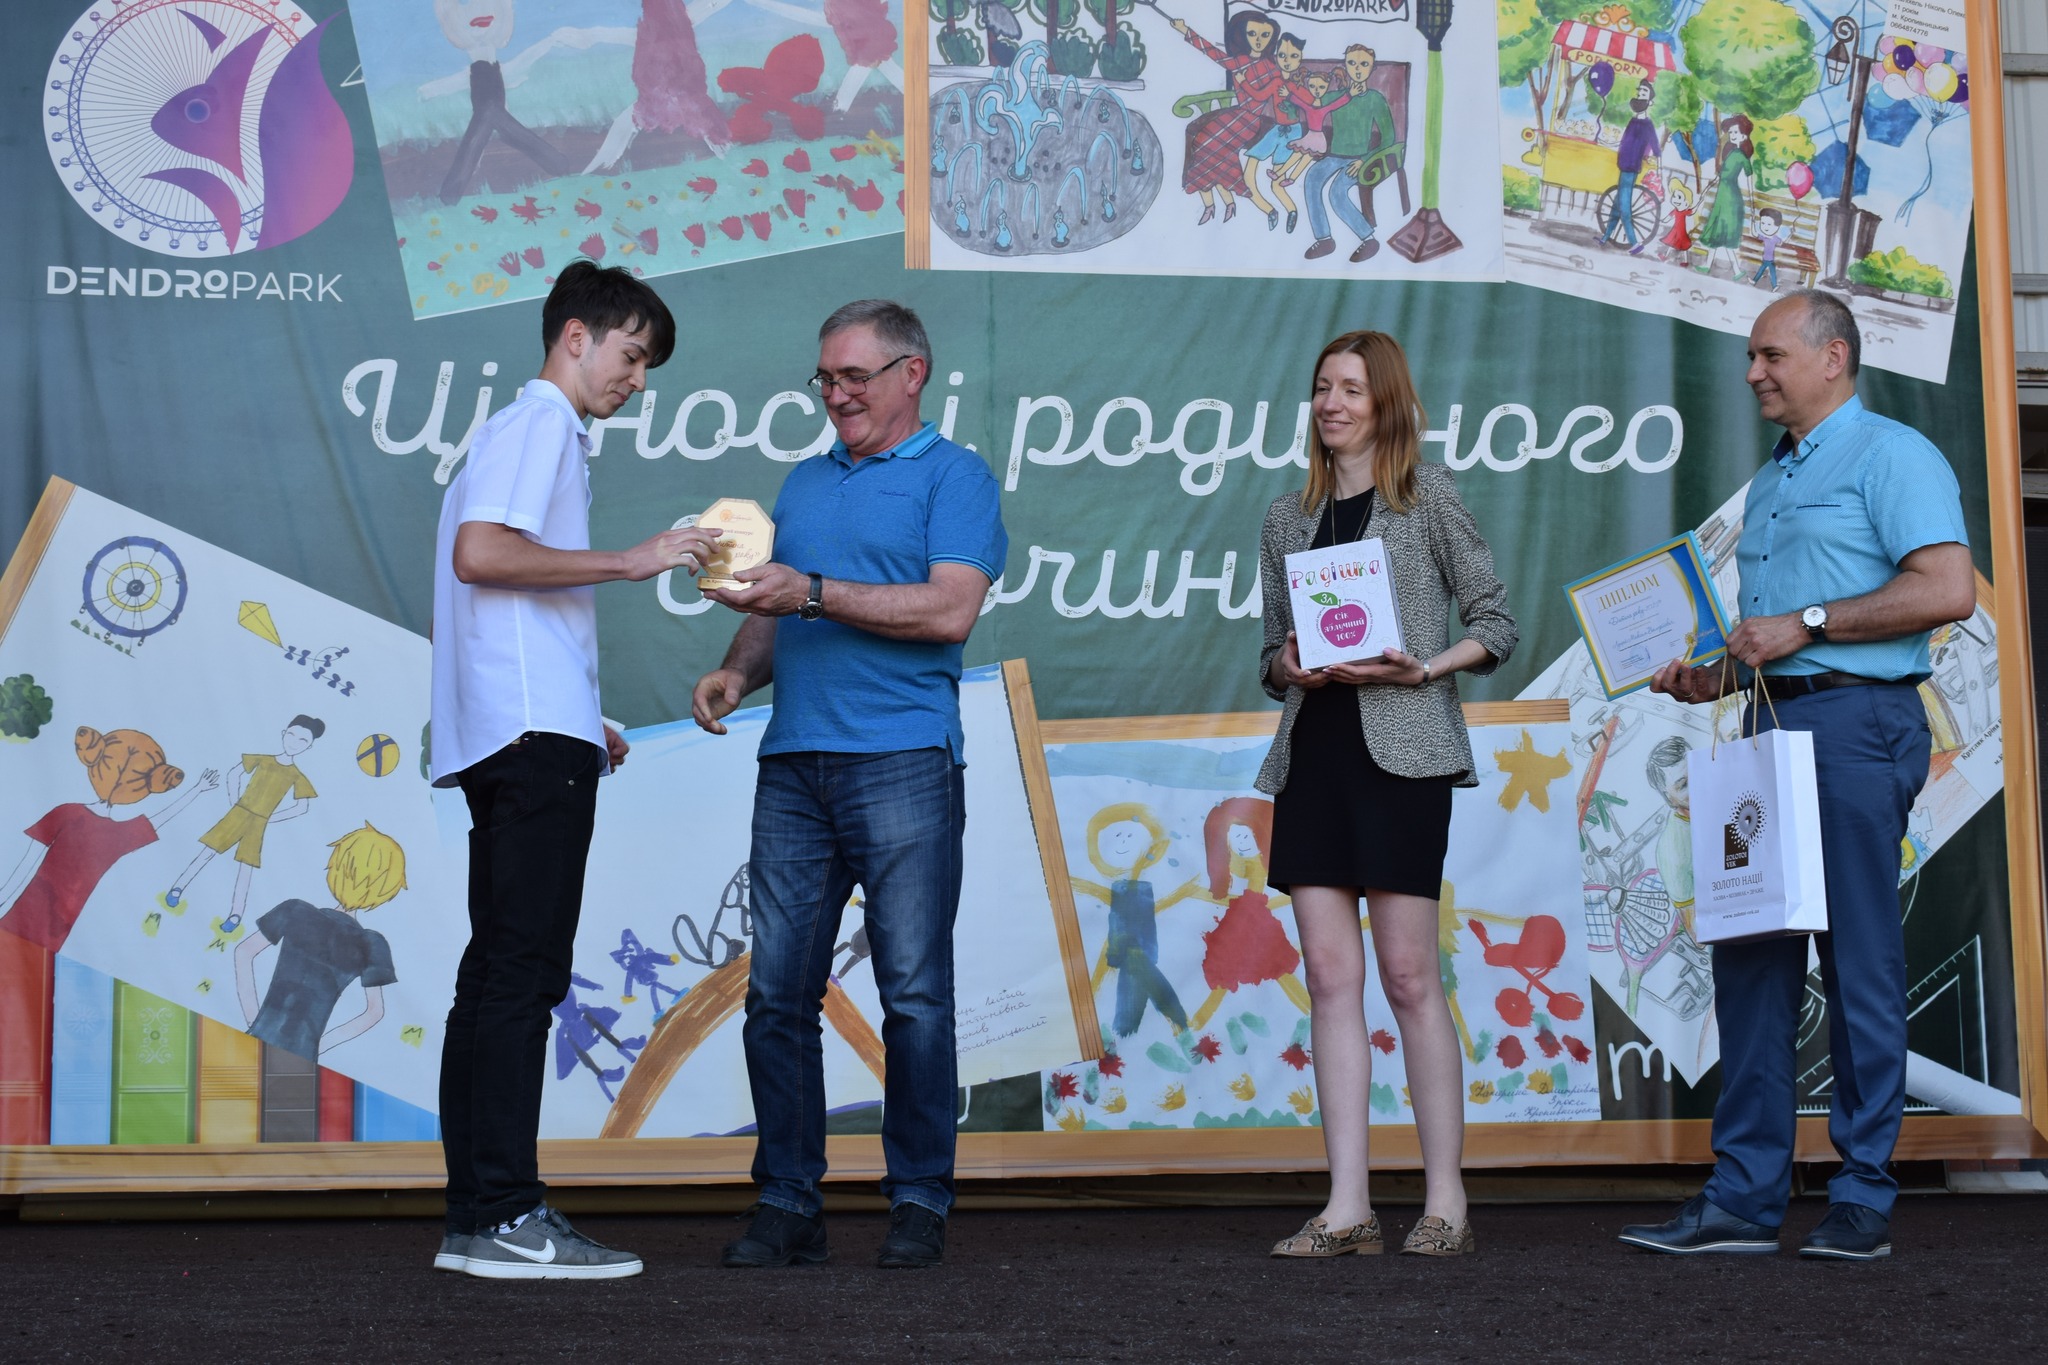 In Kropyvnytskyi awarded to a young man who extinguished fires and fed elderly people in Mariupol